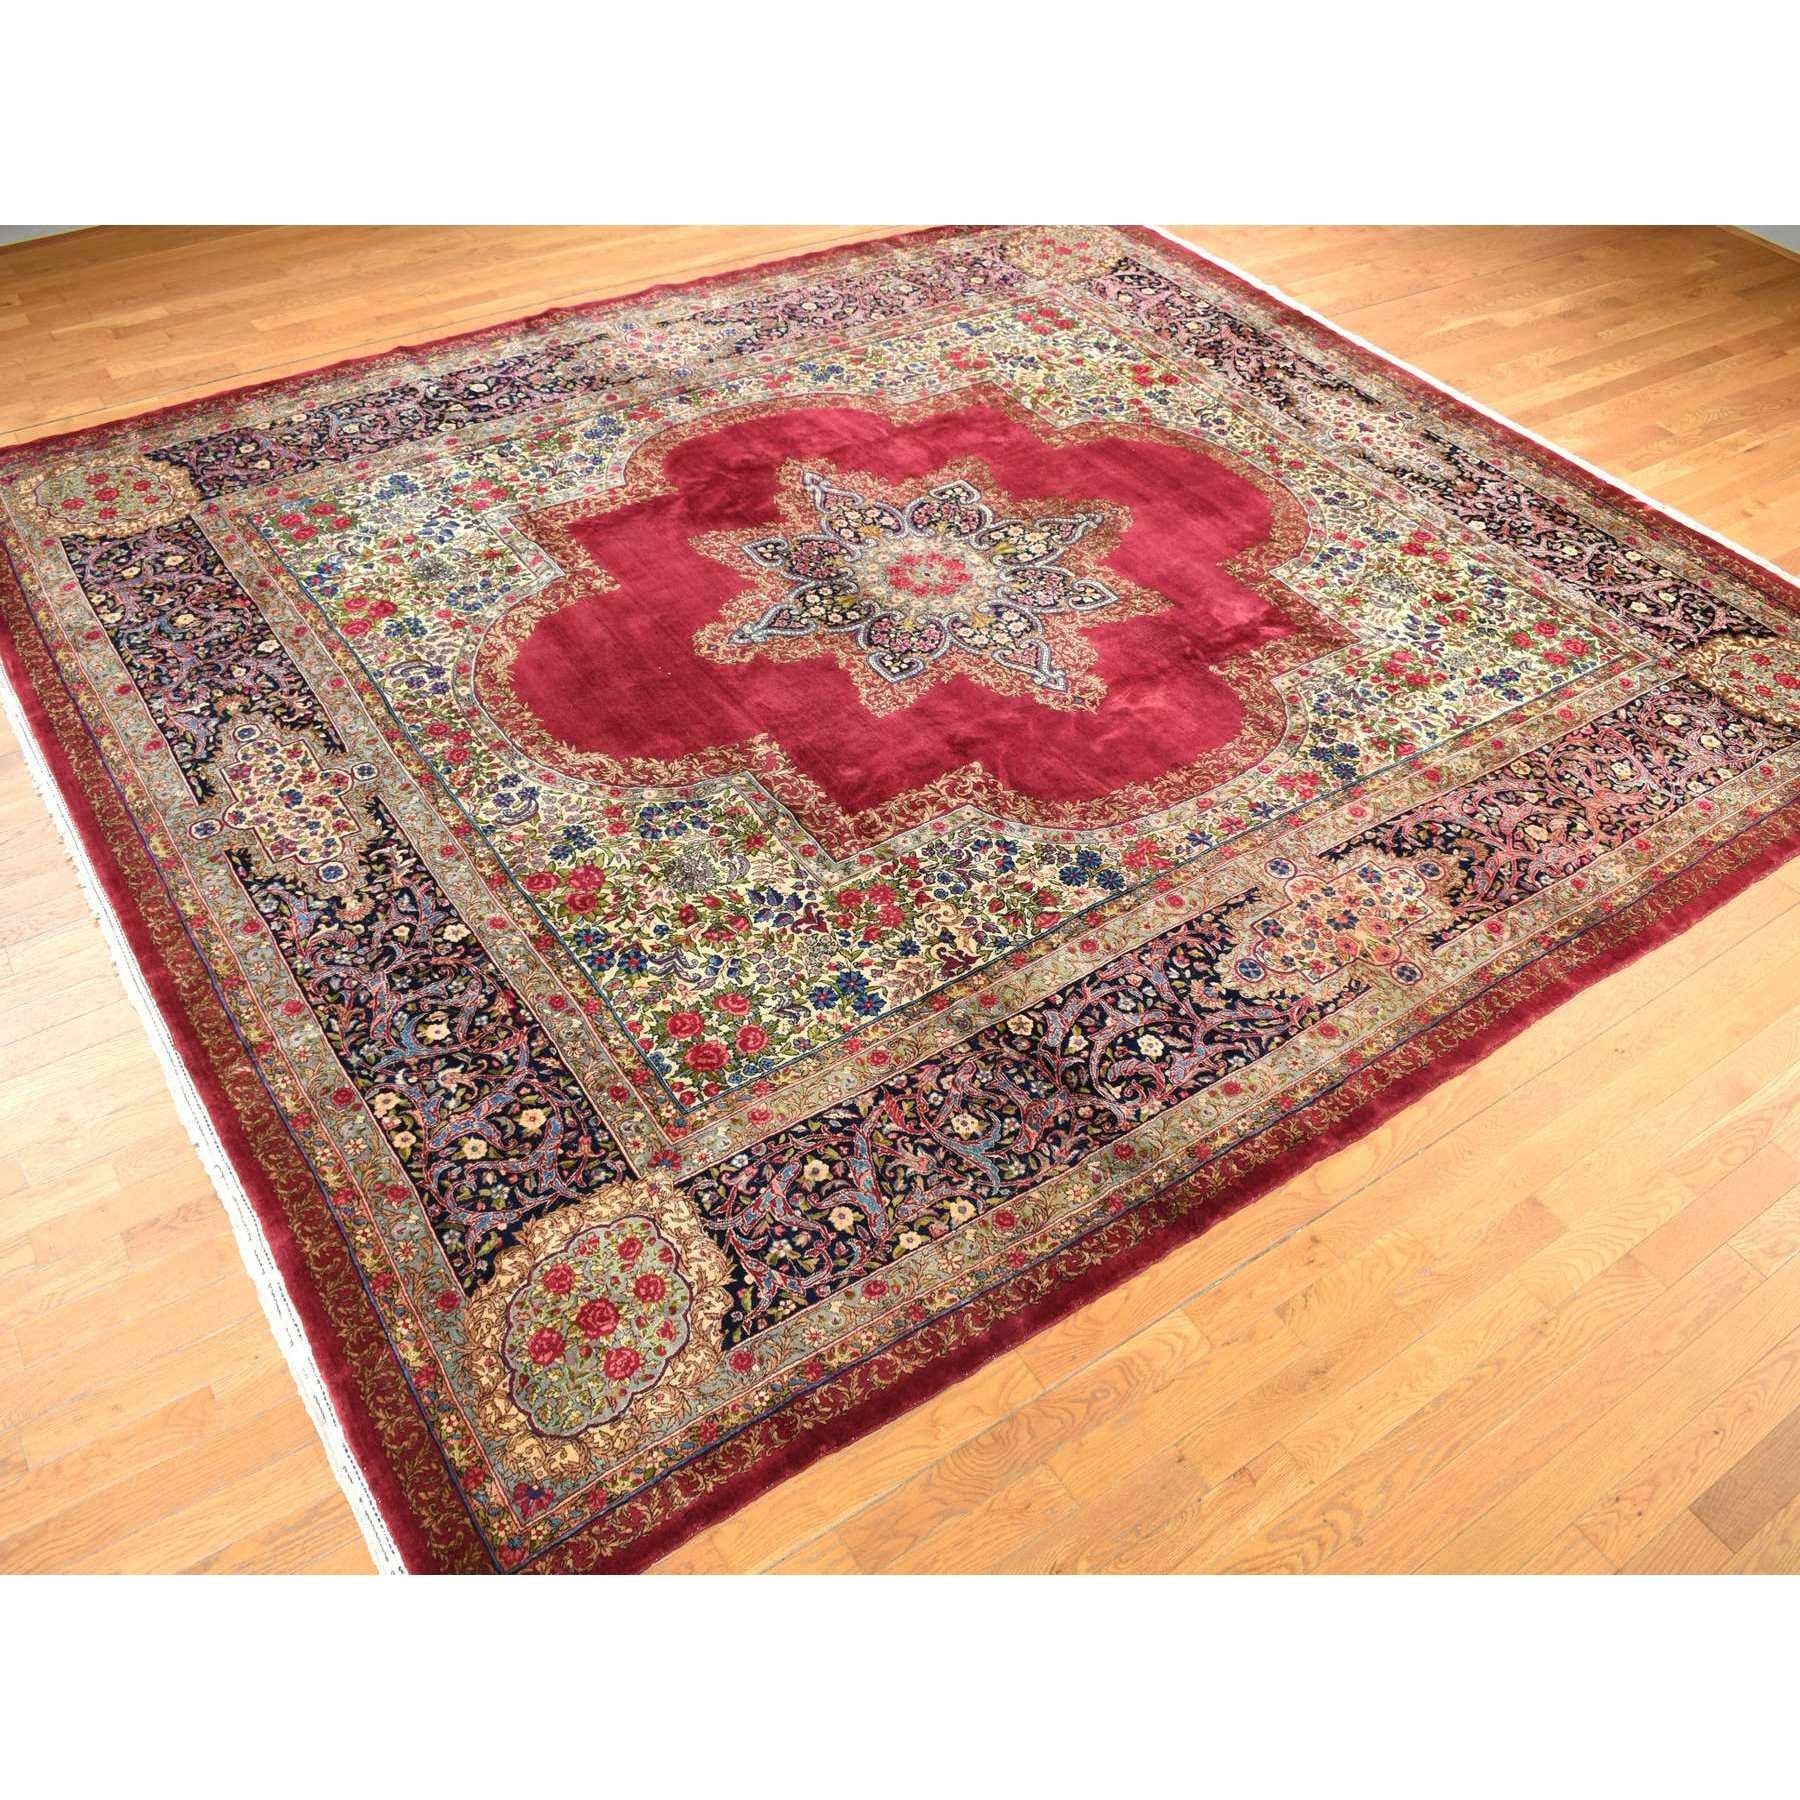 Hand-Knotted Red Antique Persian Kerman 300 KPSI Hand Knotted Wool Squarish Rug 11'8